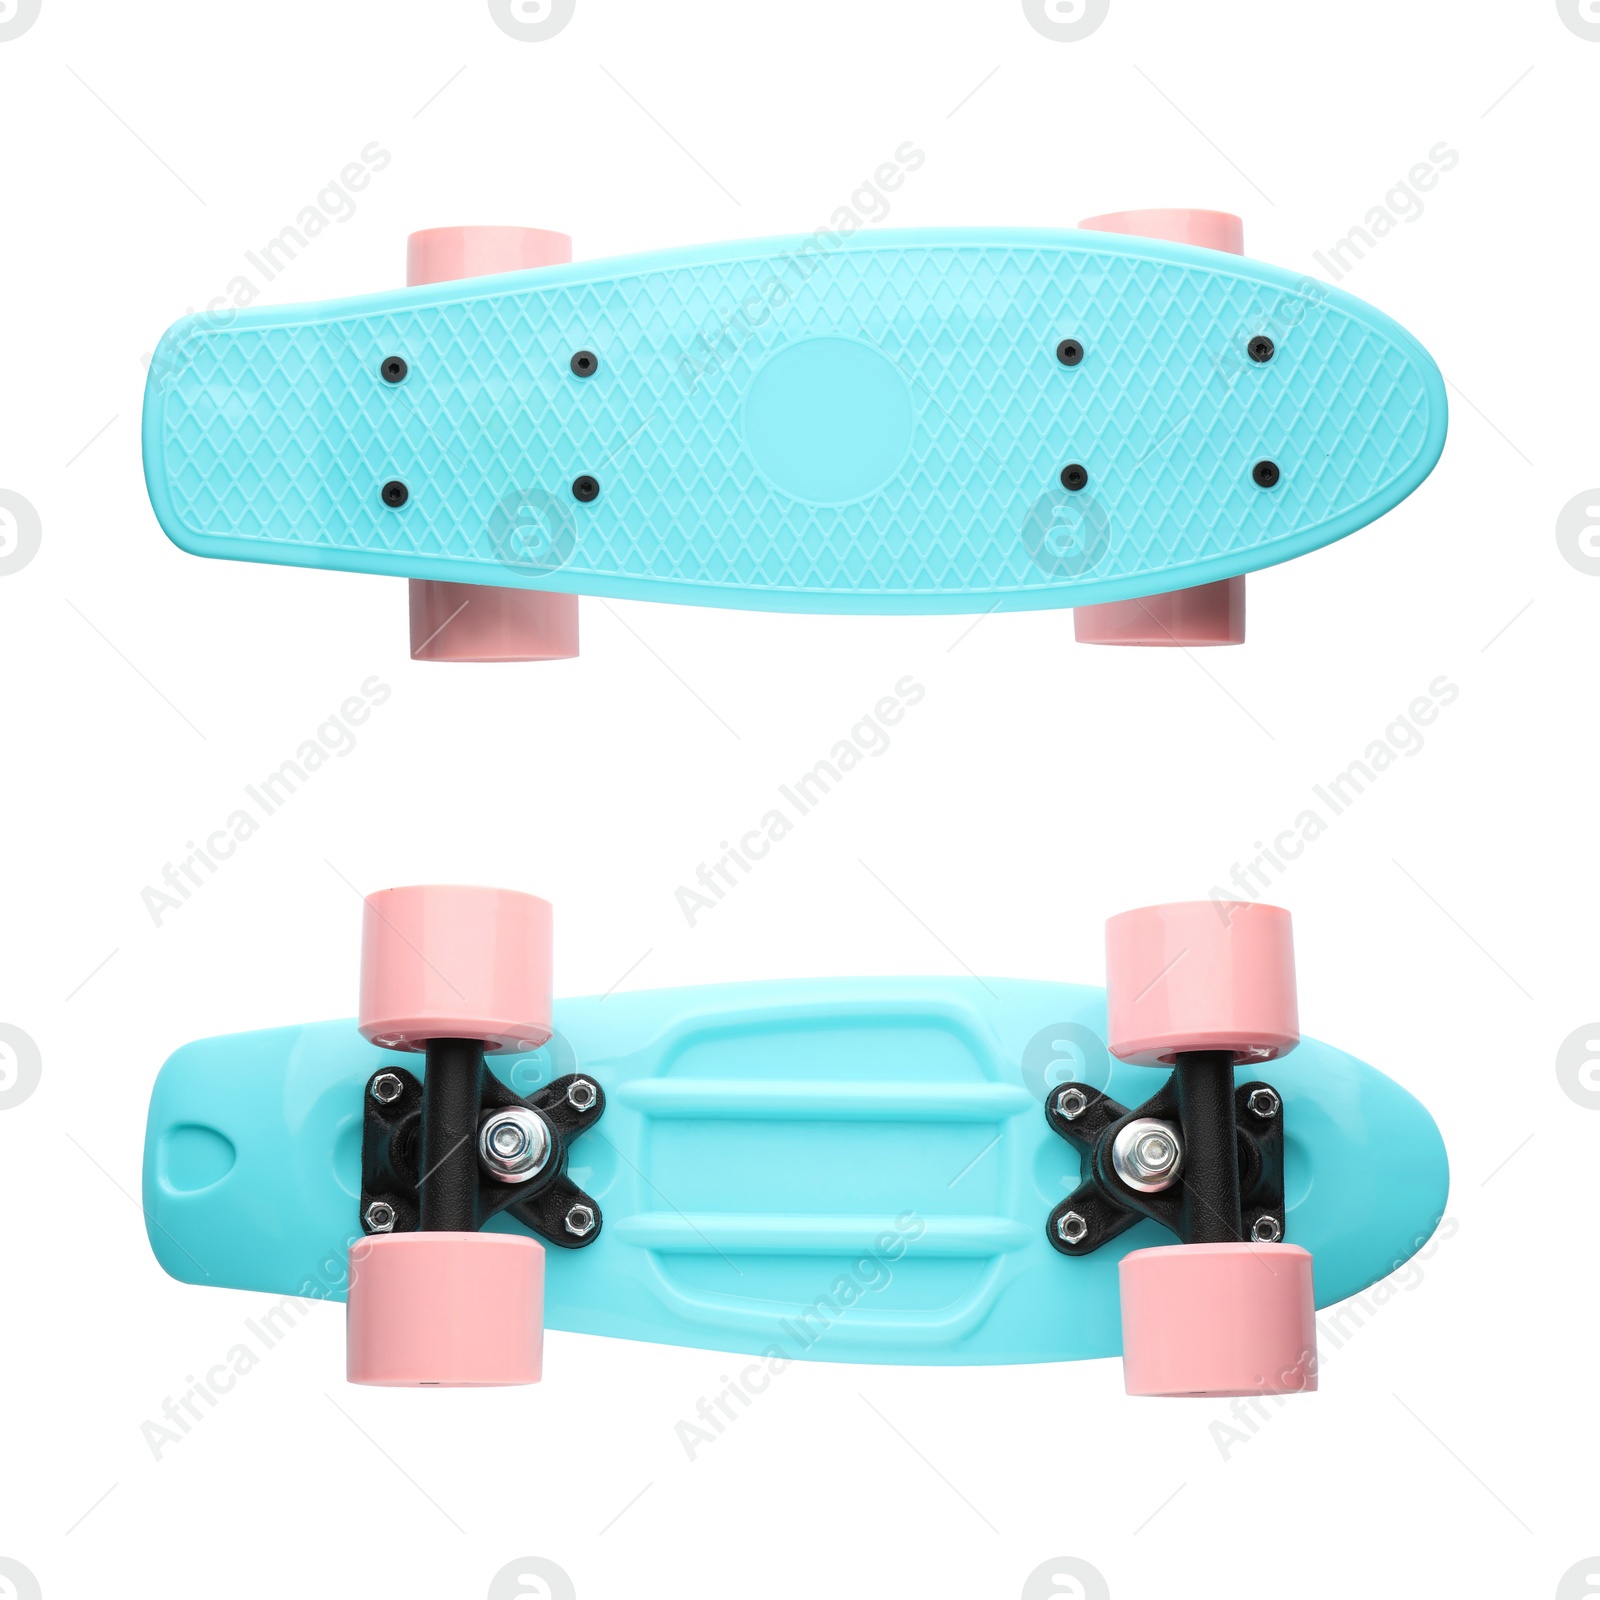 Image of Turquoise skateboards with pink wheels on white background, collage. Sport equipment